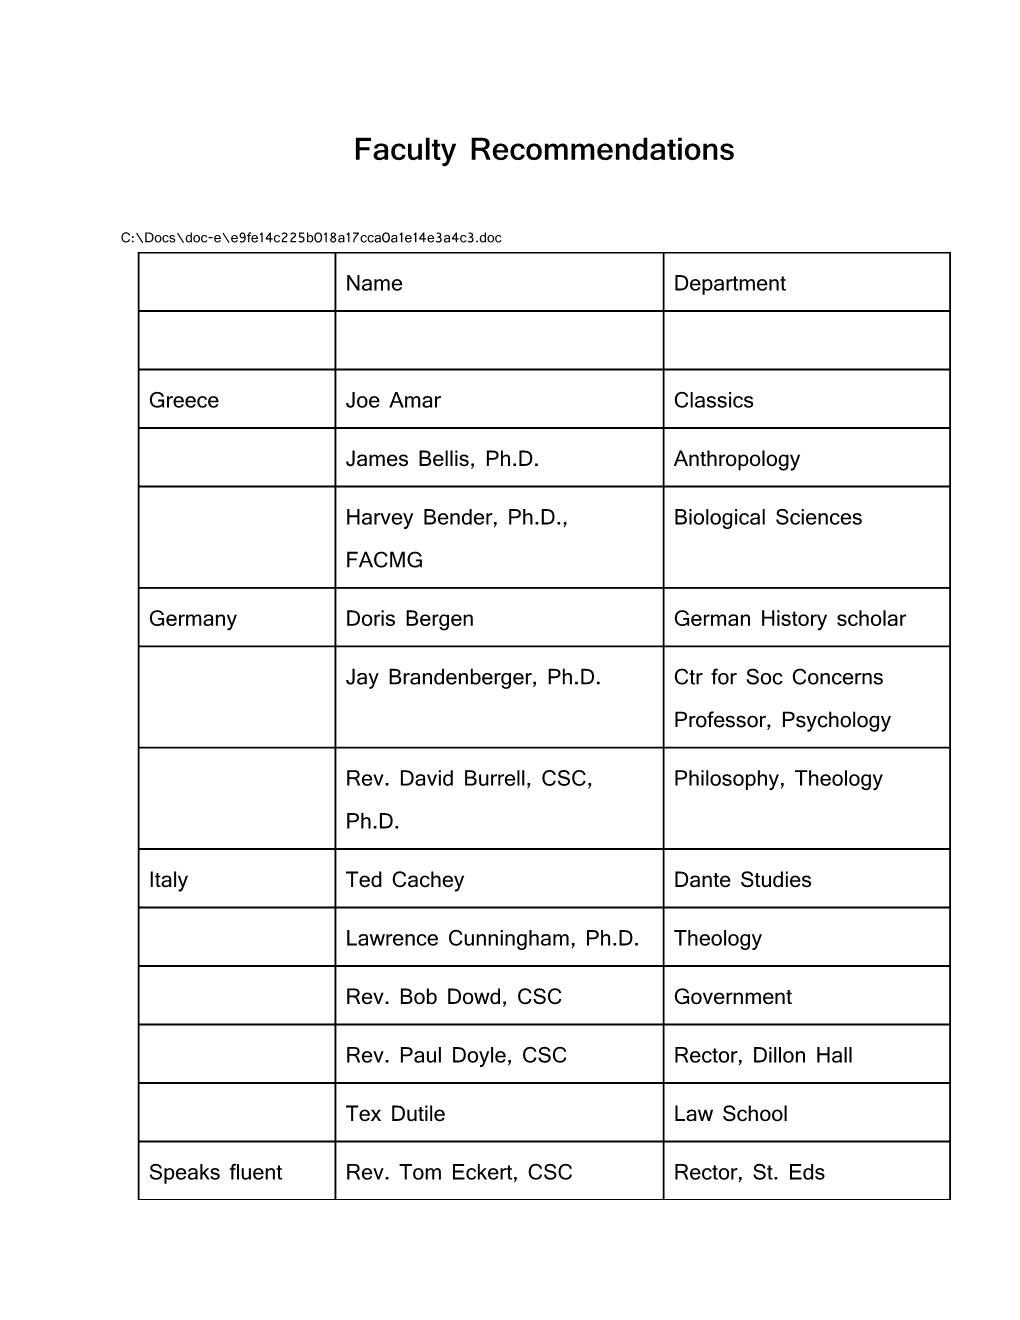 Faculty Recommendations